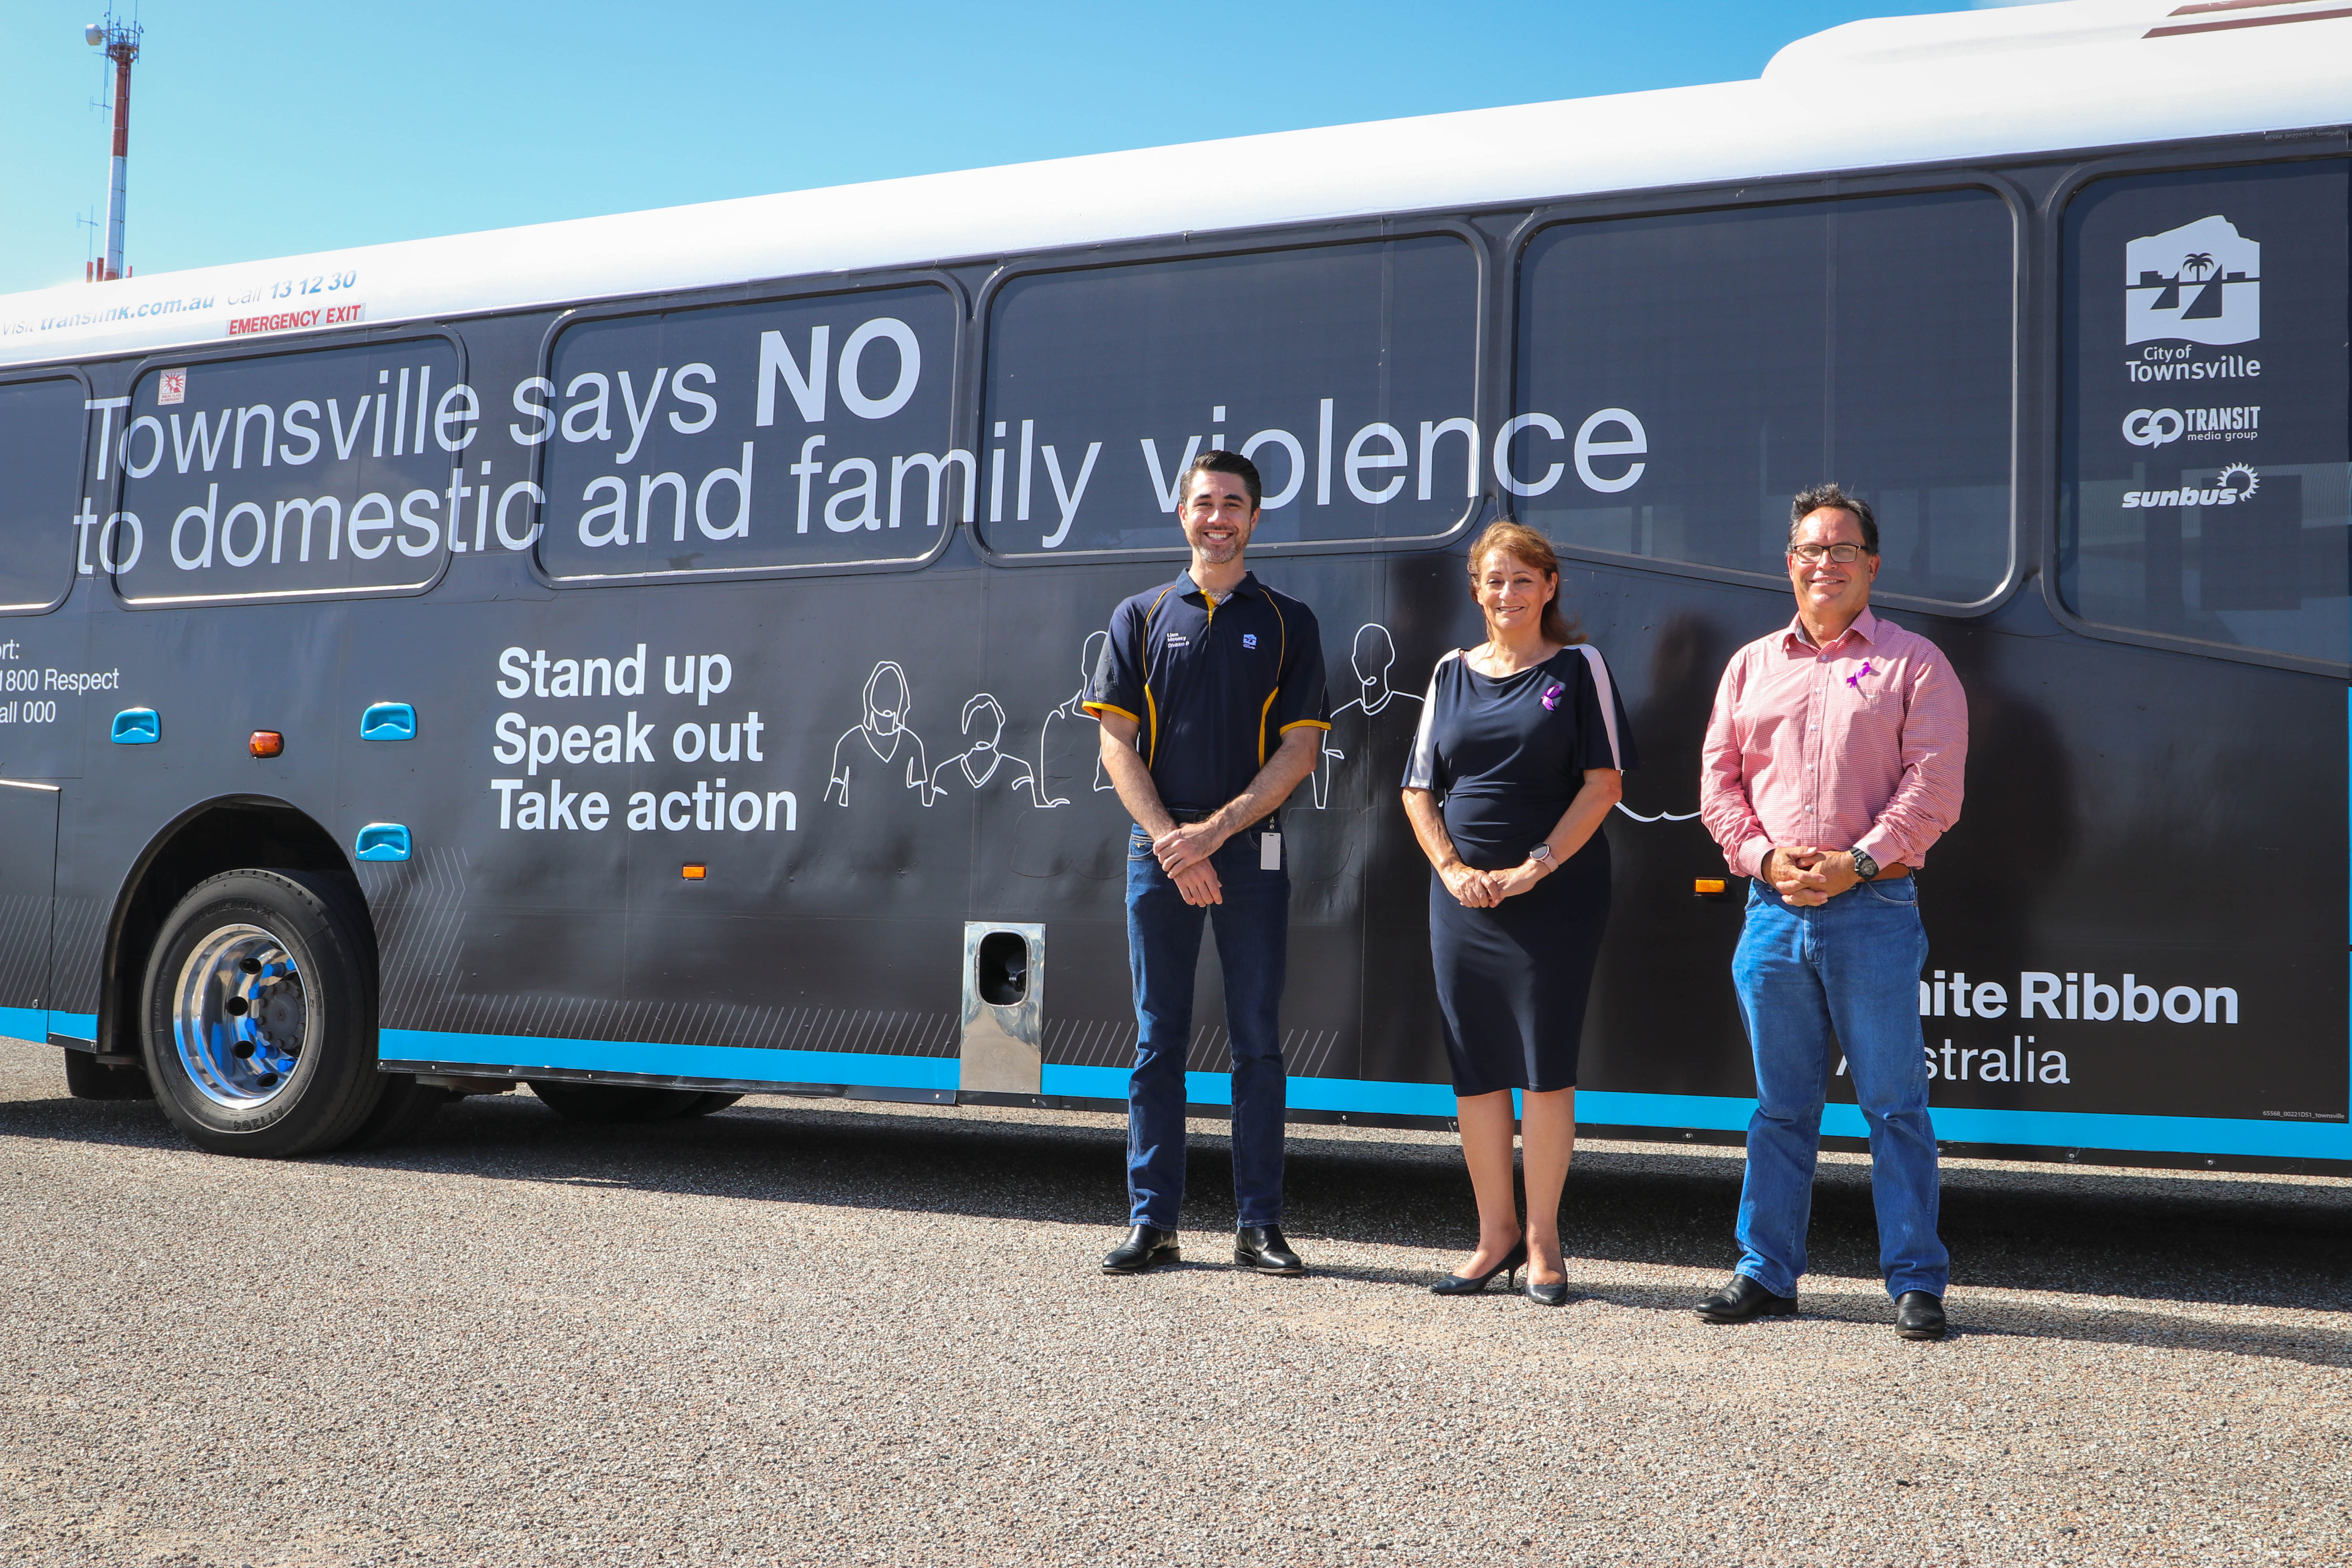 Townsville say NO to domestic and family violence